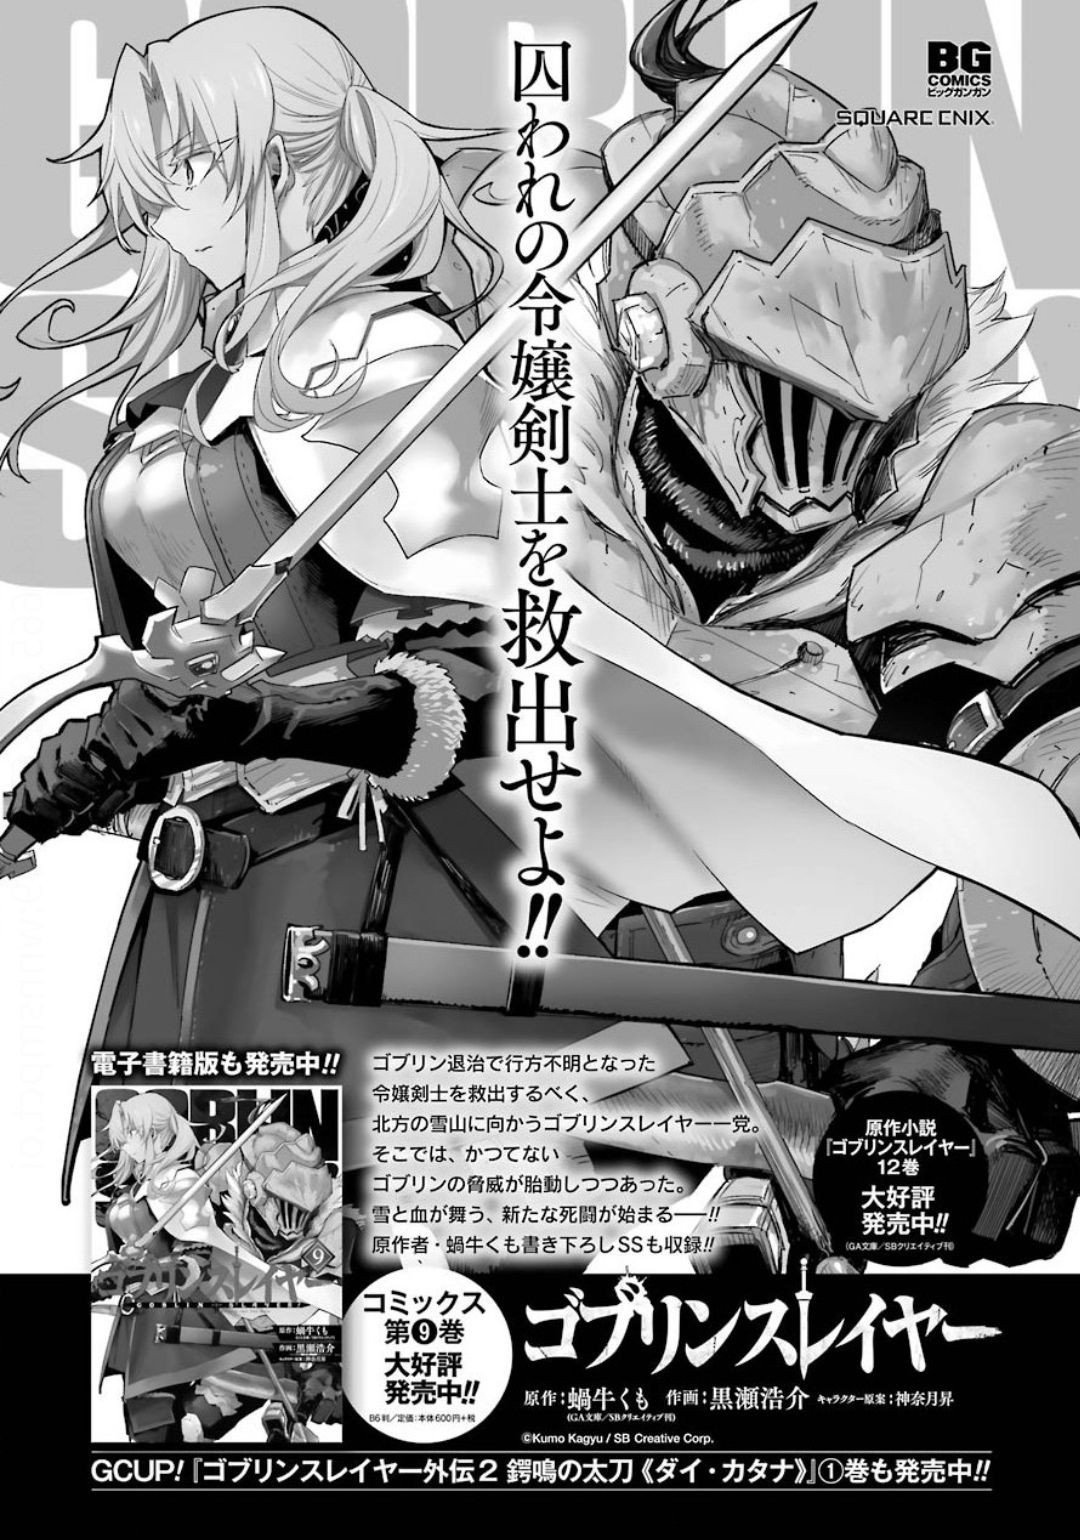 Goblin Slayer - Chapter 50 - Page 1